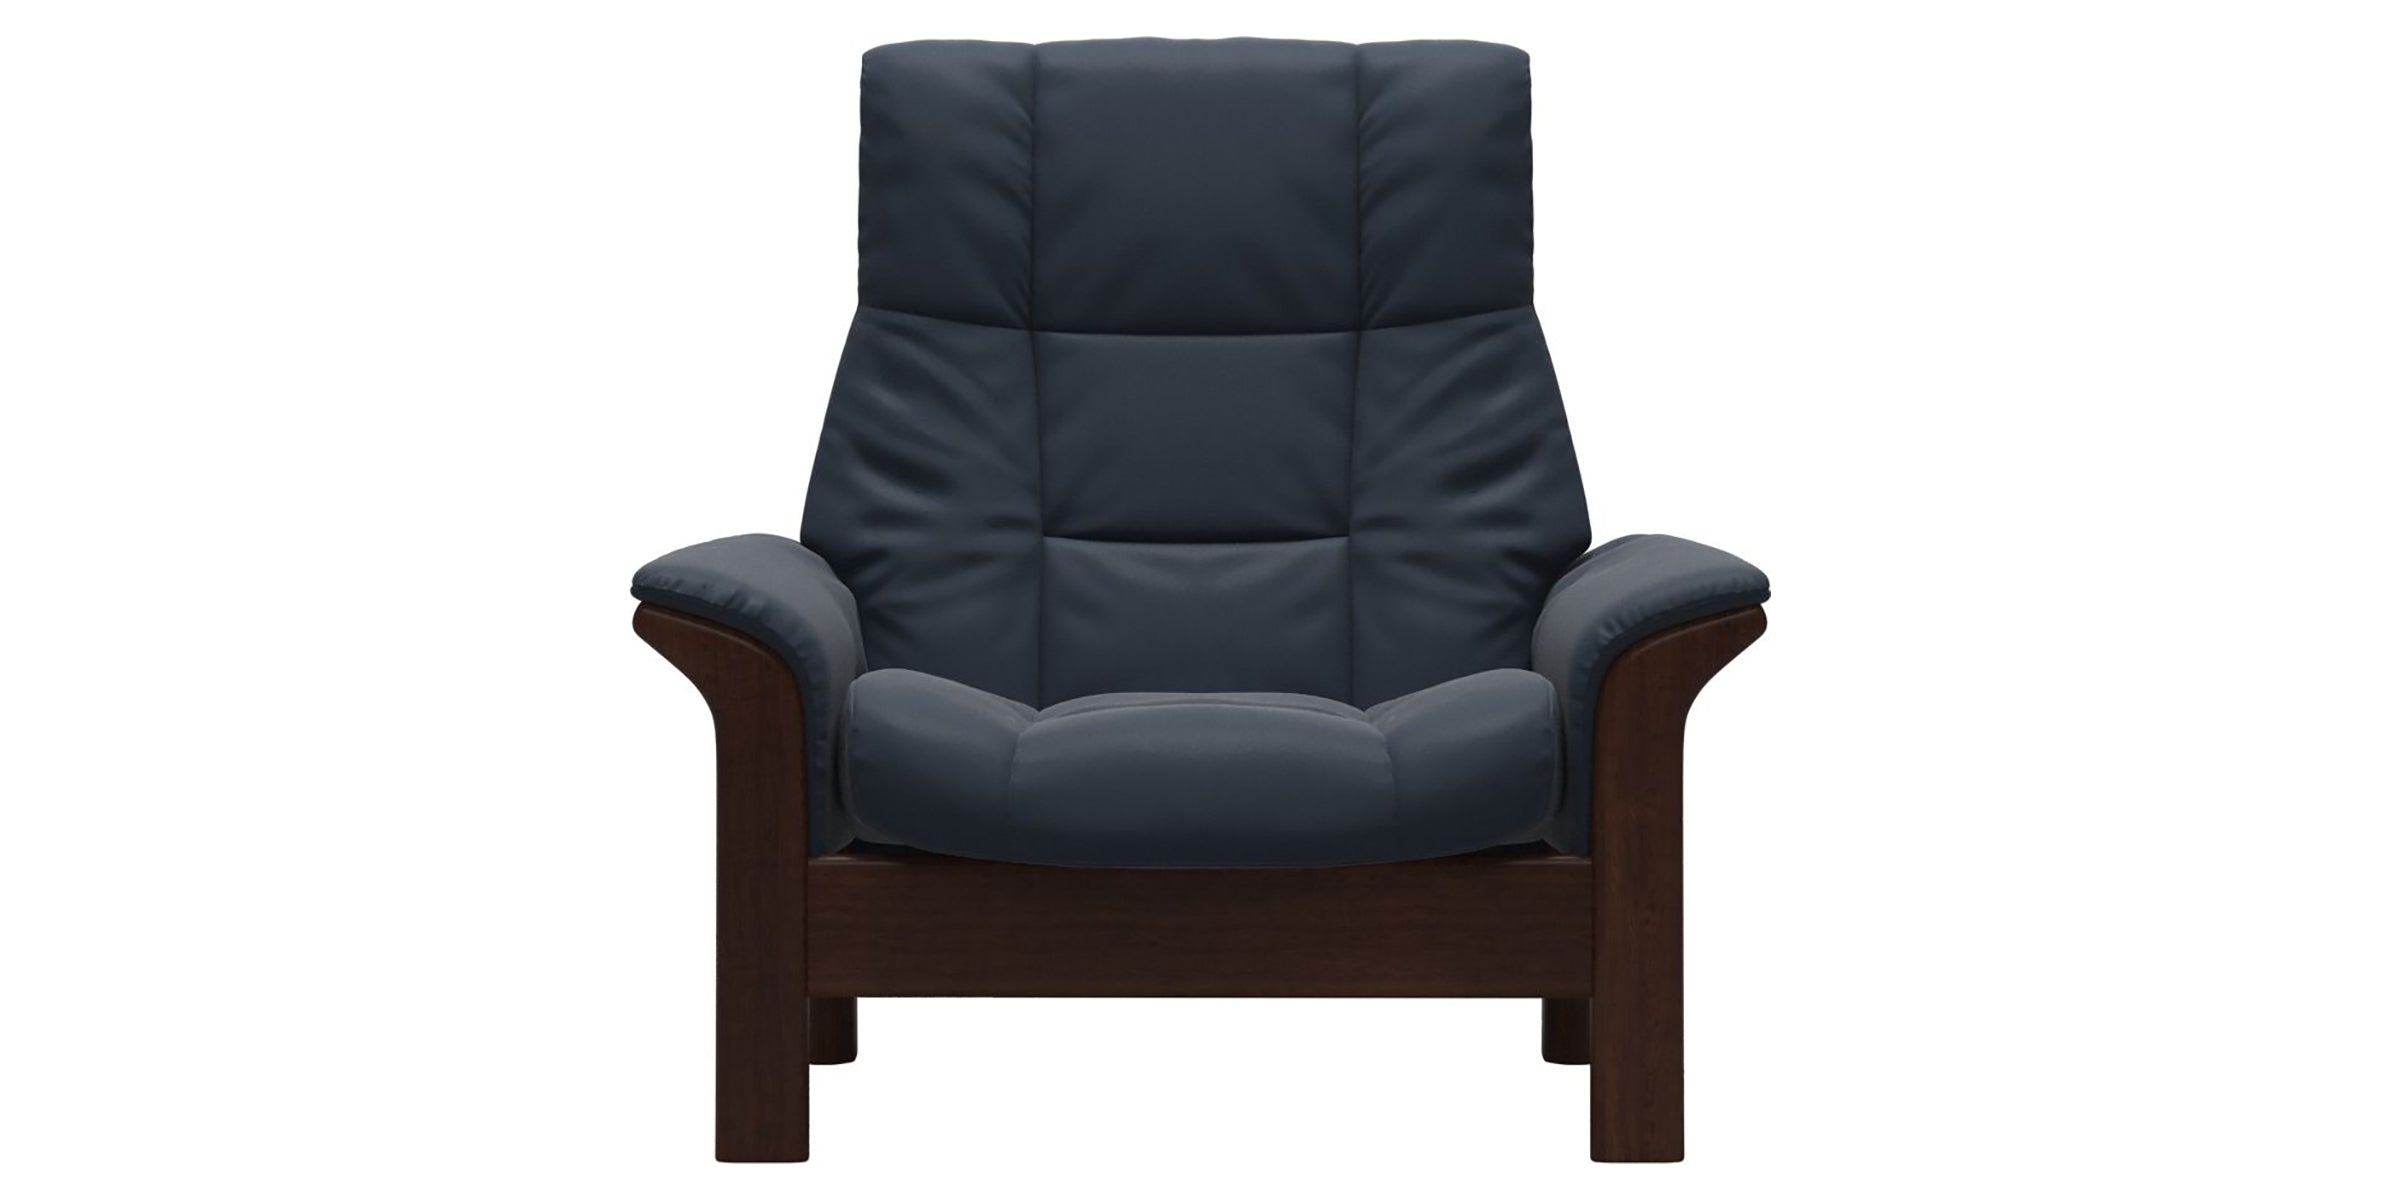 Paloma Leather Oxford Blue and Brown Base | Stressless Buckingham High Back Chair | Valley Ridge Furniture